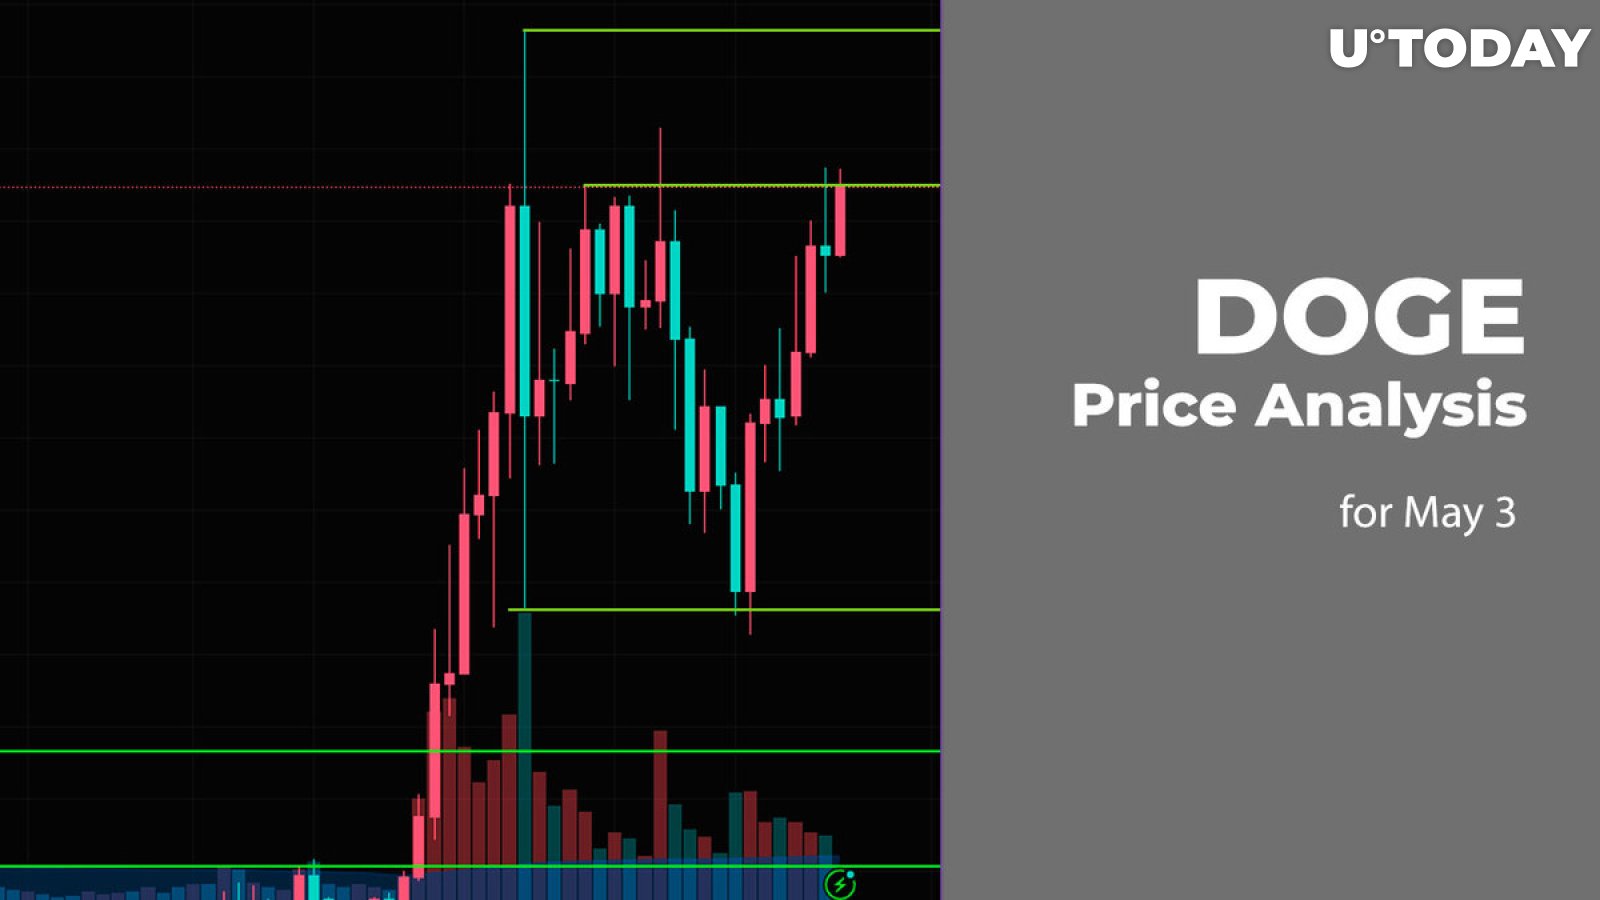 DOGE Price Prediction for May 3